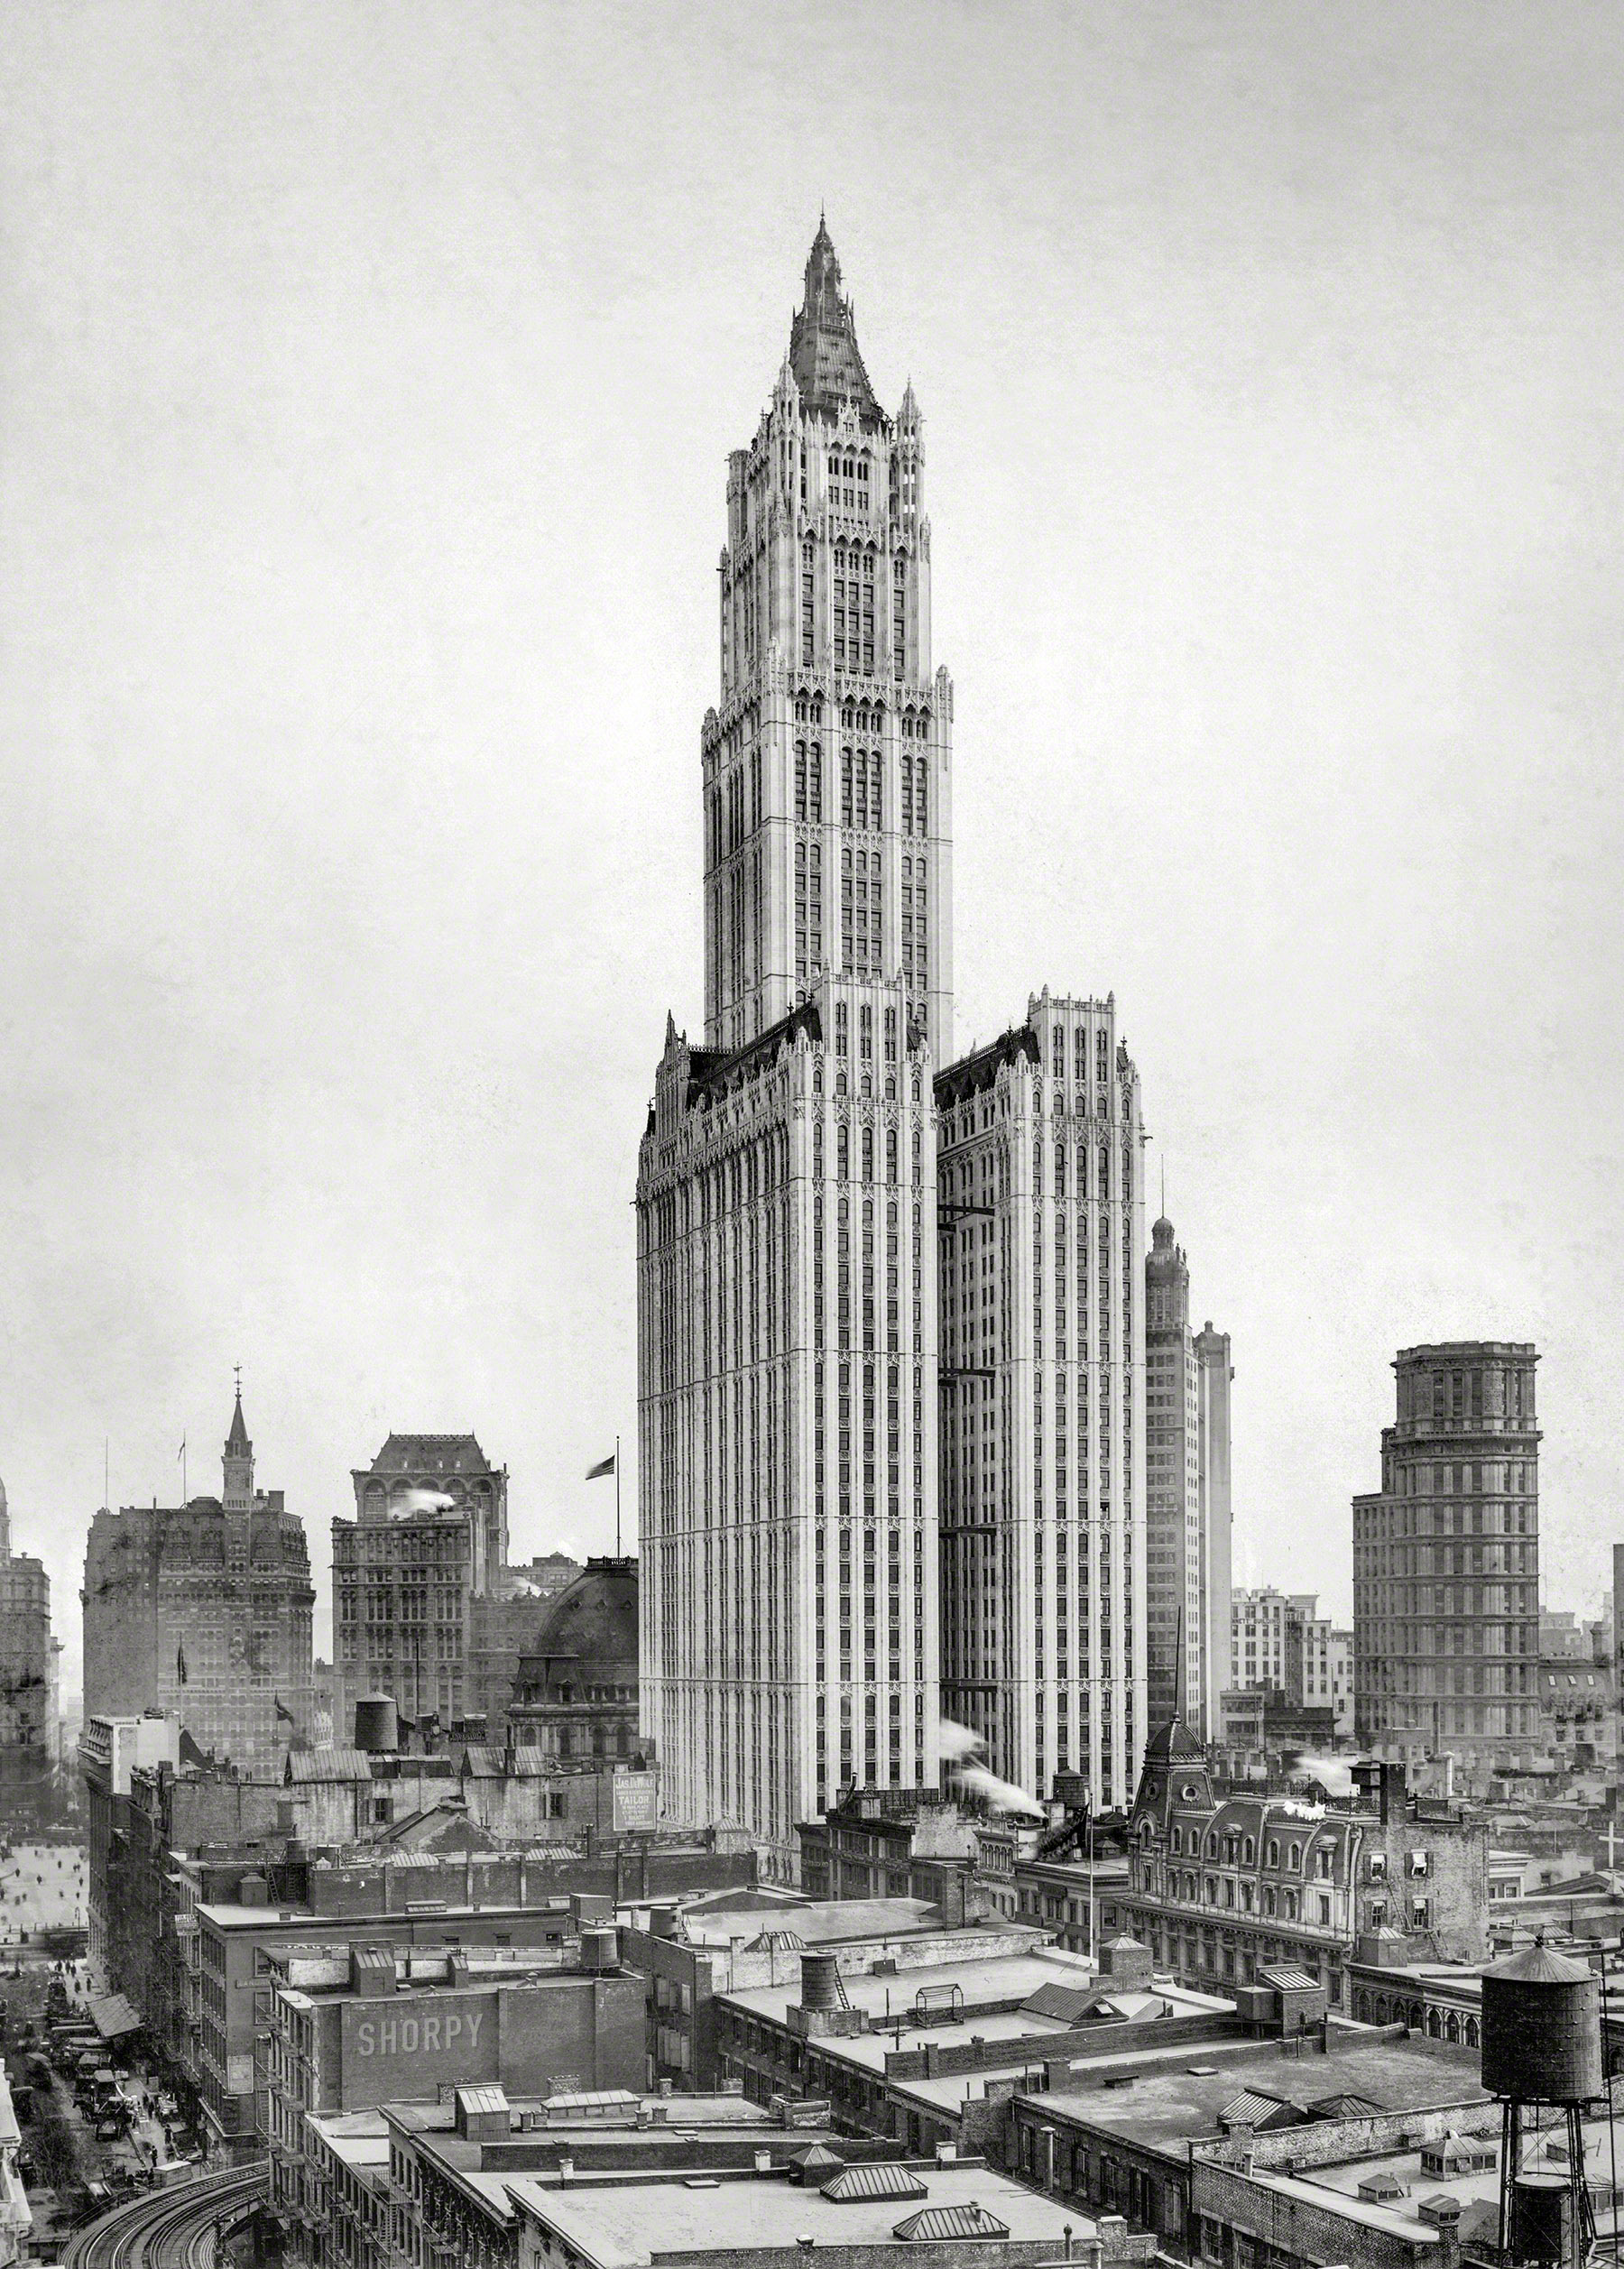 November 20, 1912. "Woolworth Building, New York." Irving Underhill photo. View full size.